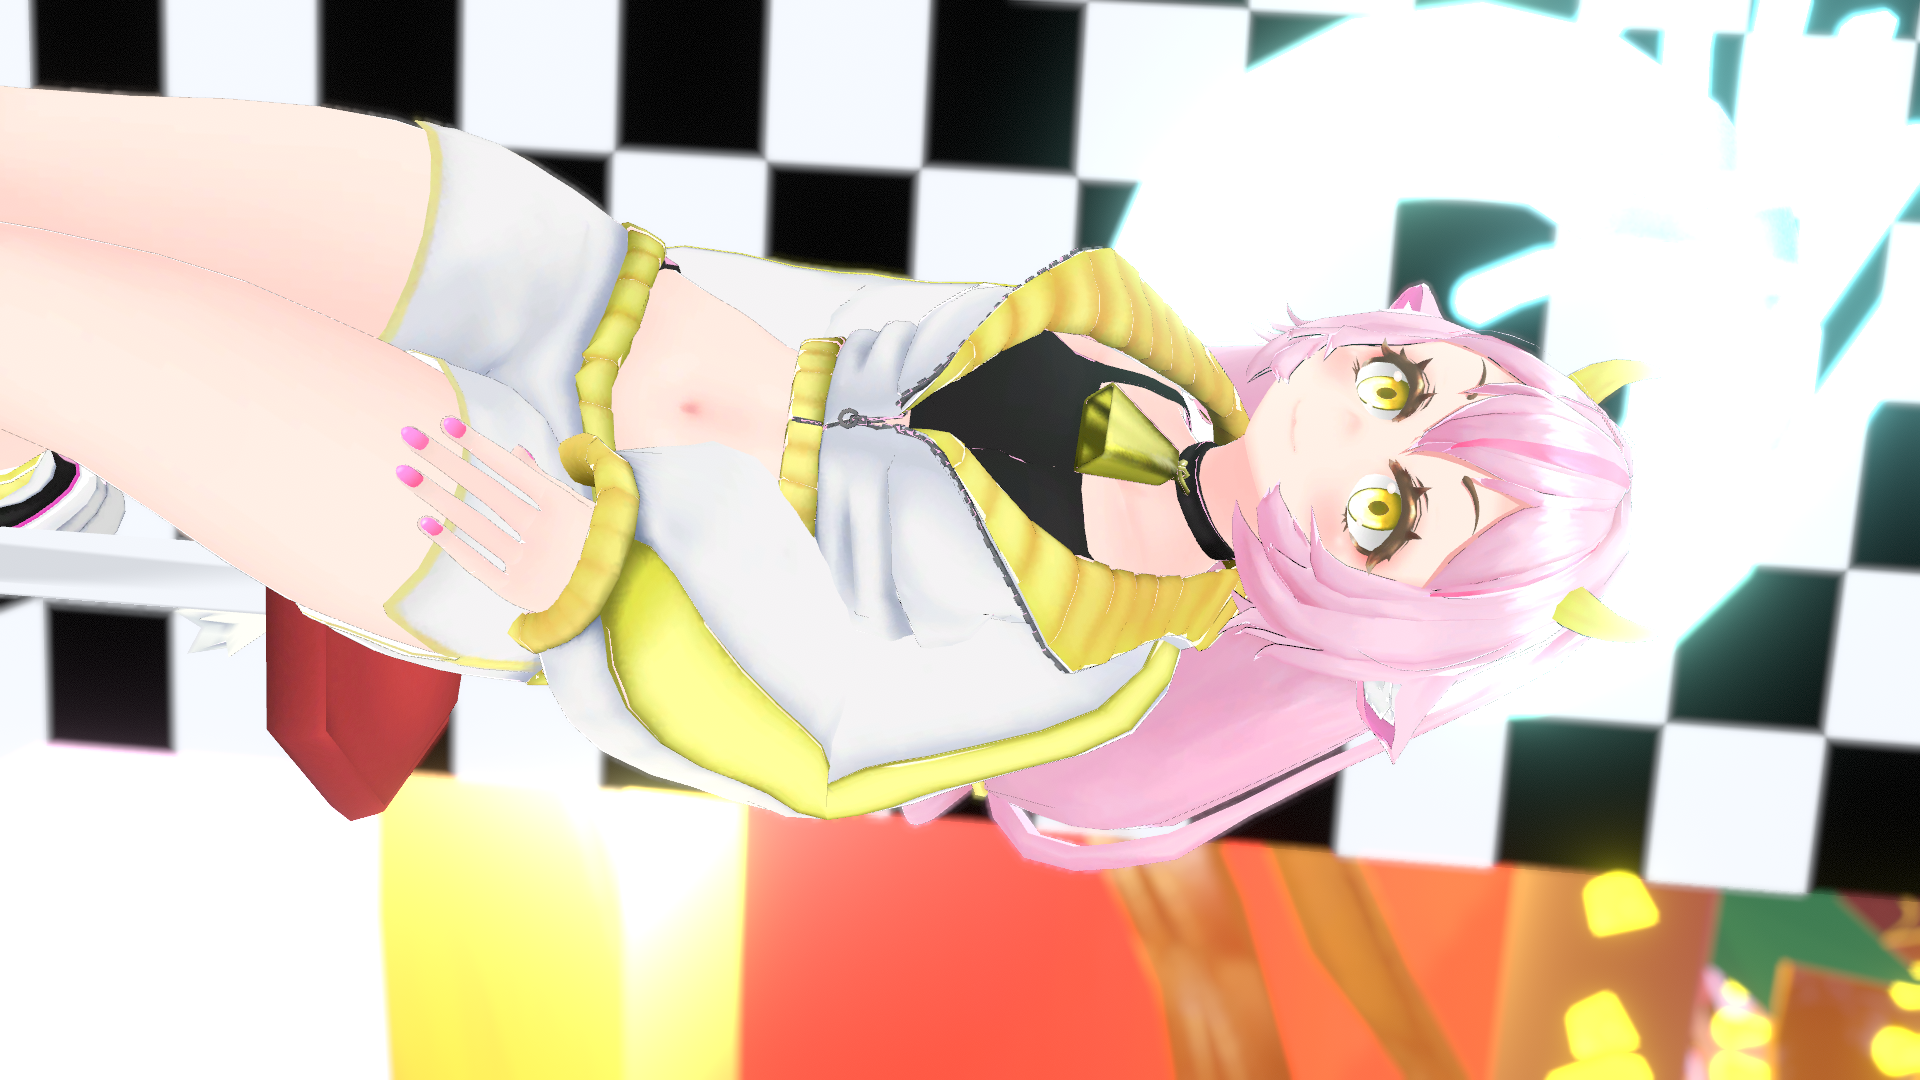 VRChat_1920x1080_2021-12-05_05-08-24.866.png